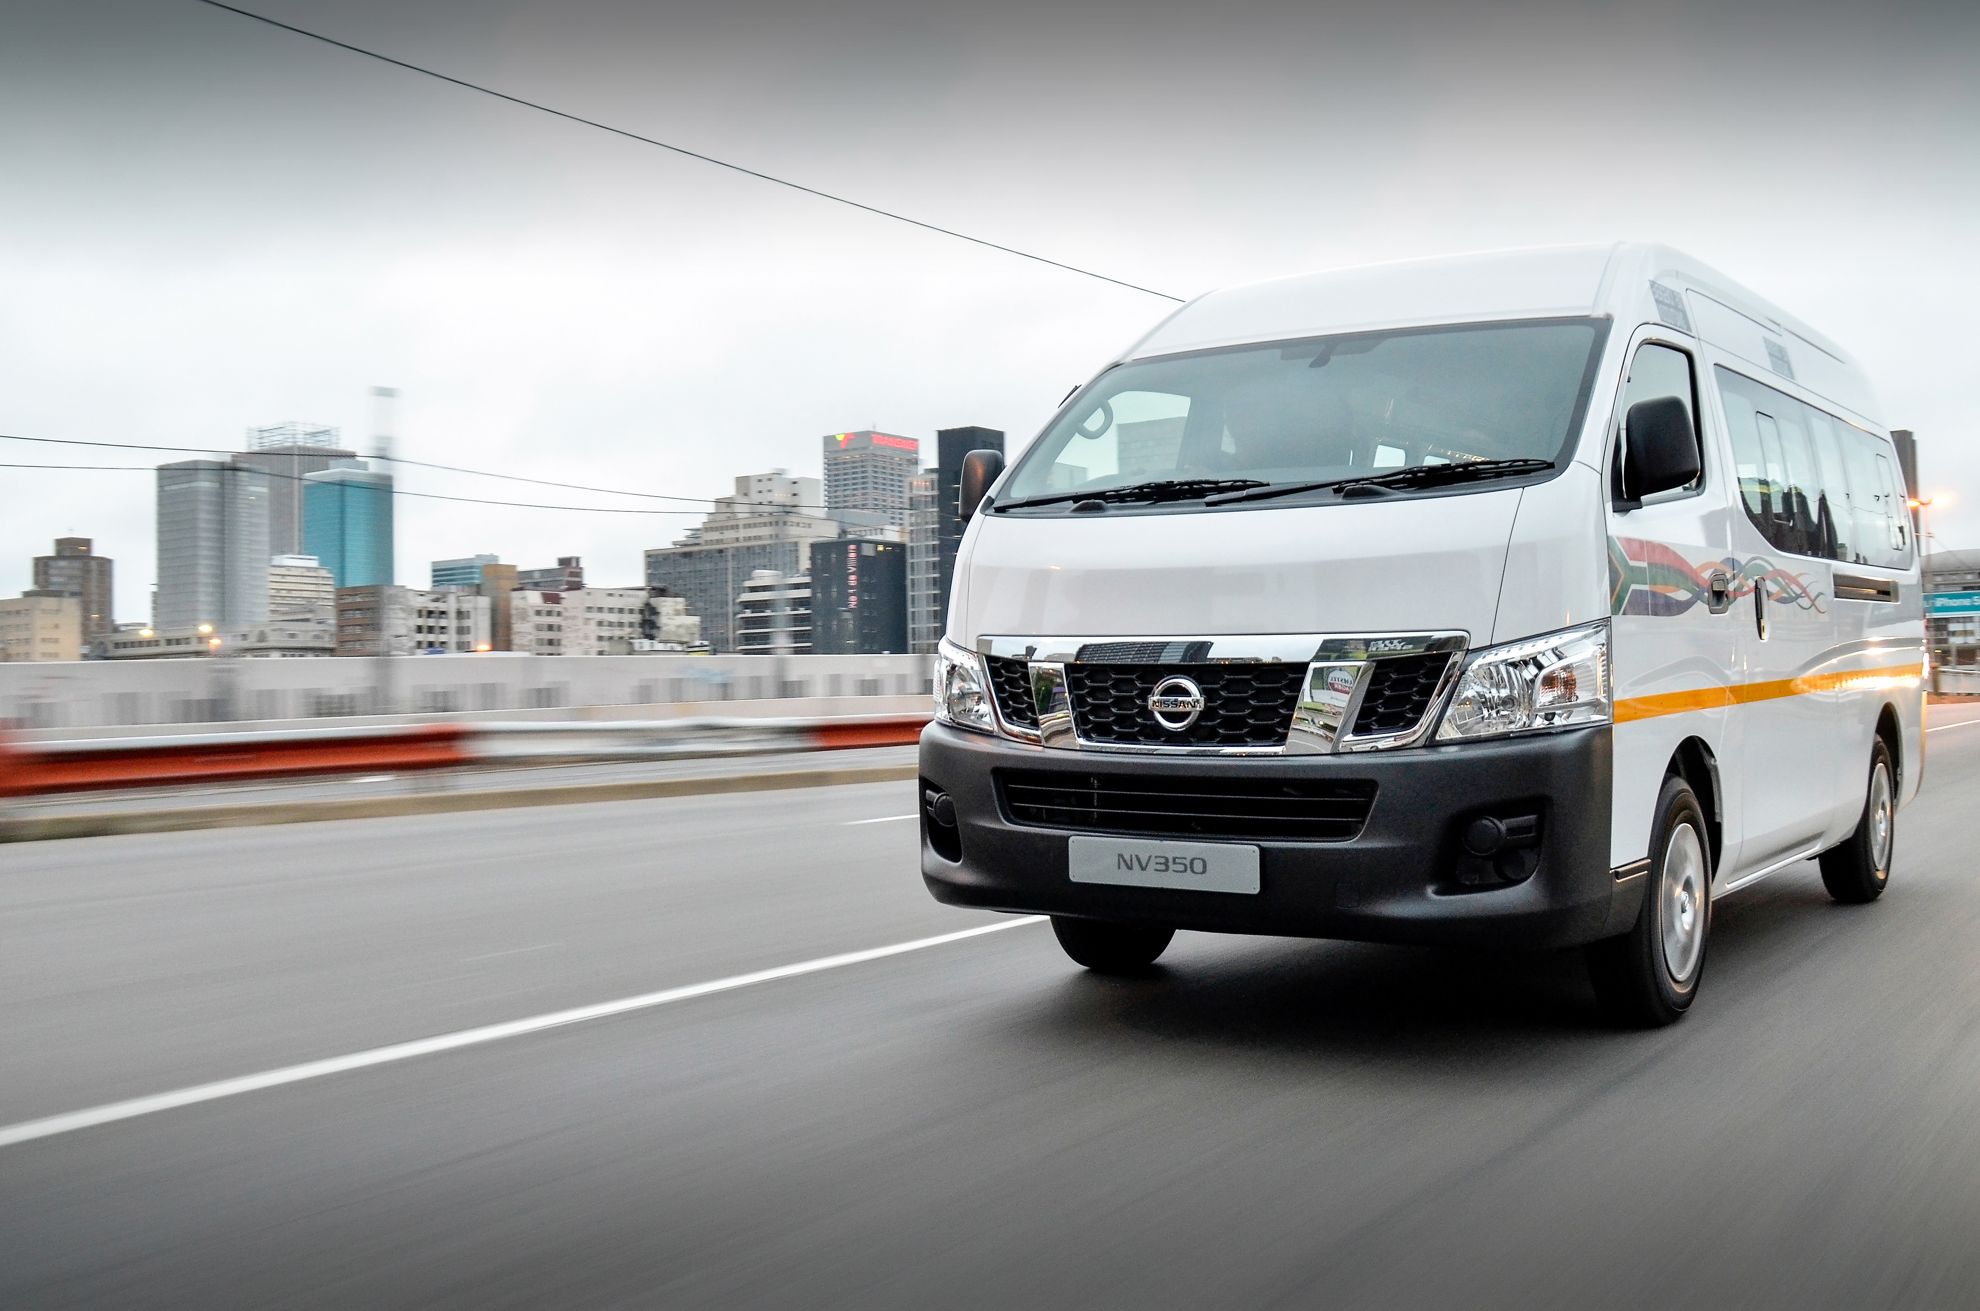 Nissan Taxi Back in South Africa